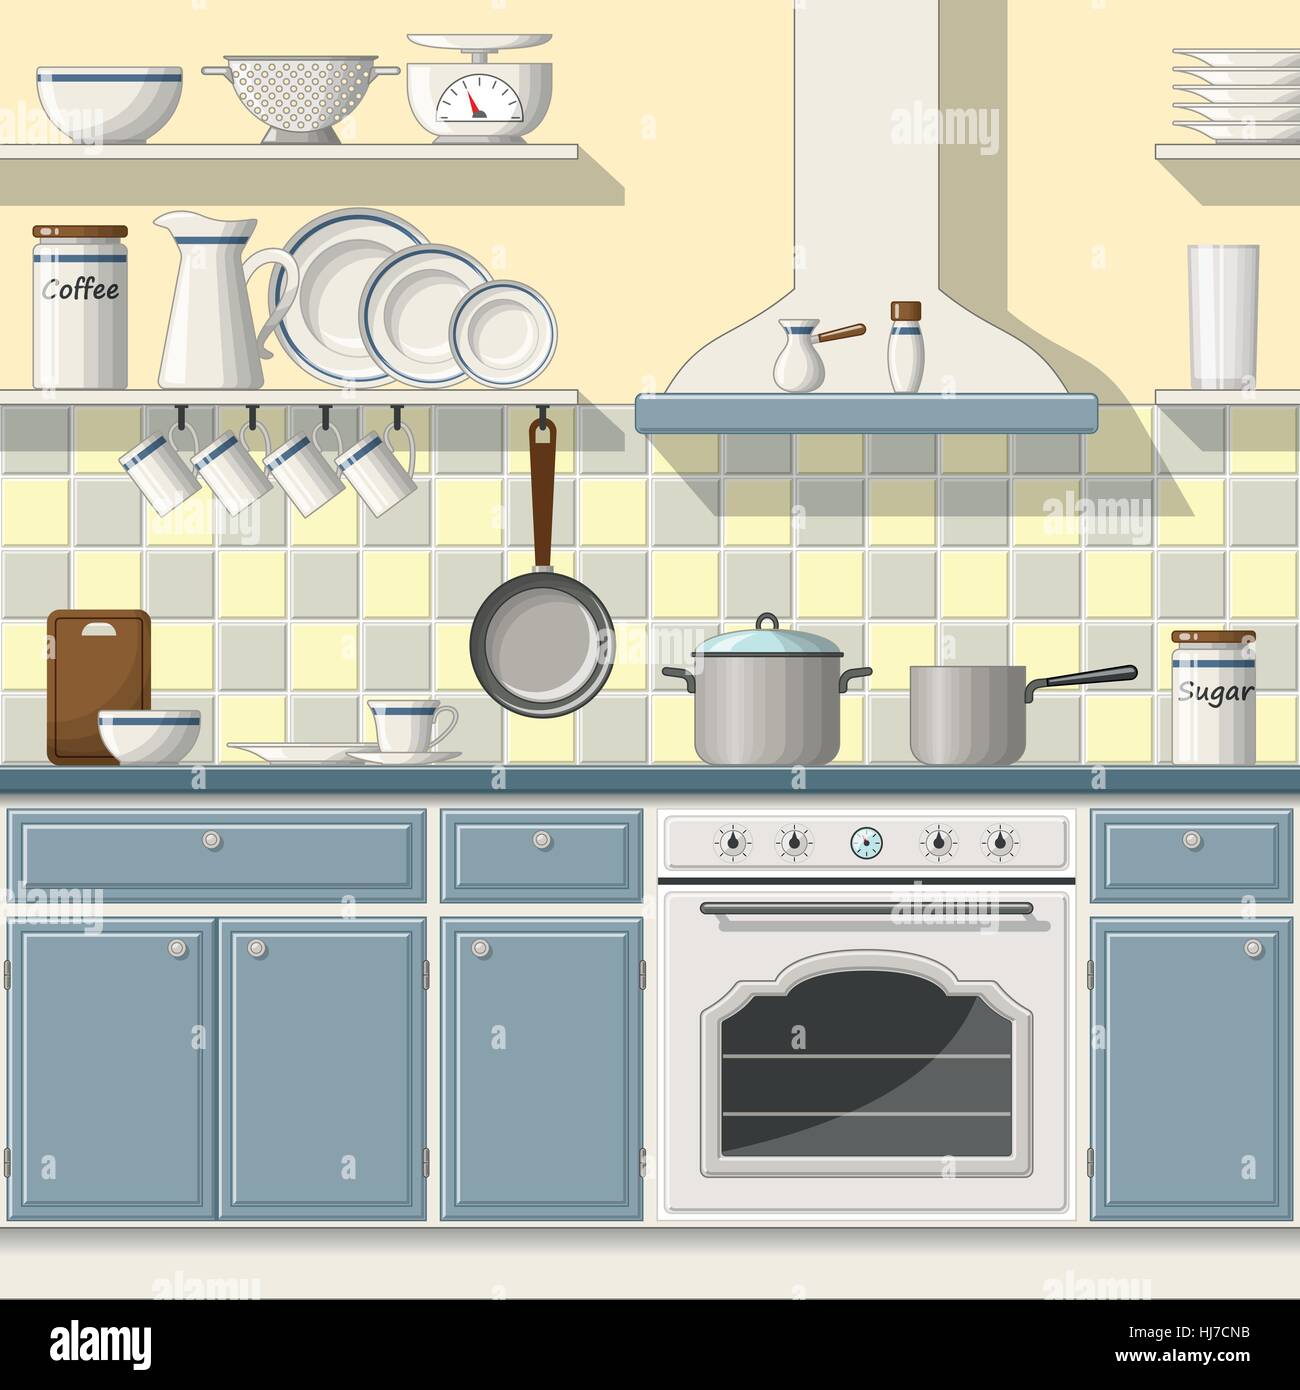 Illustrtion of a classic kitchen Stock Vector